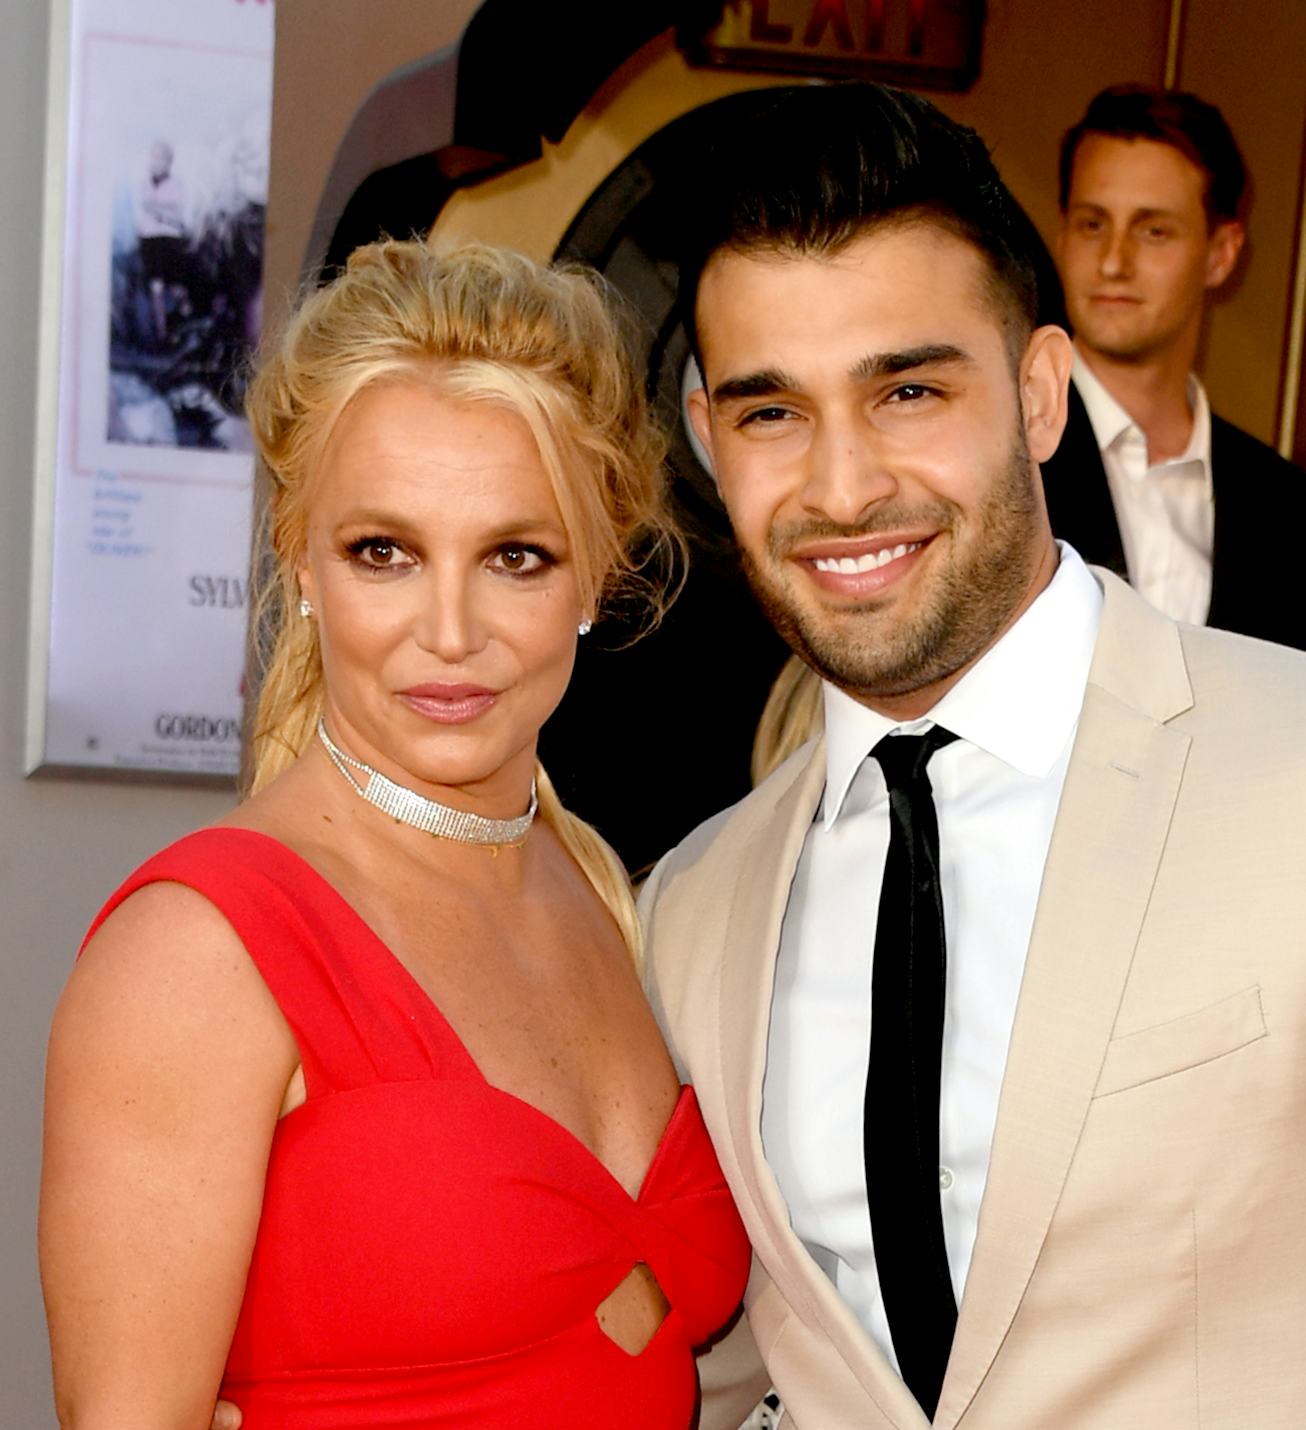 Britney Spears and Sam Asghari are engaged